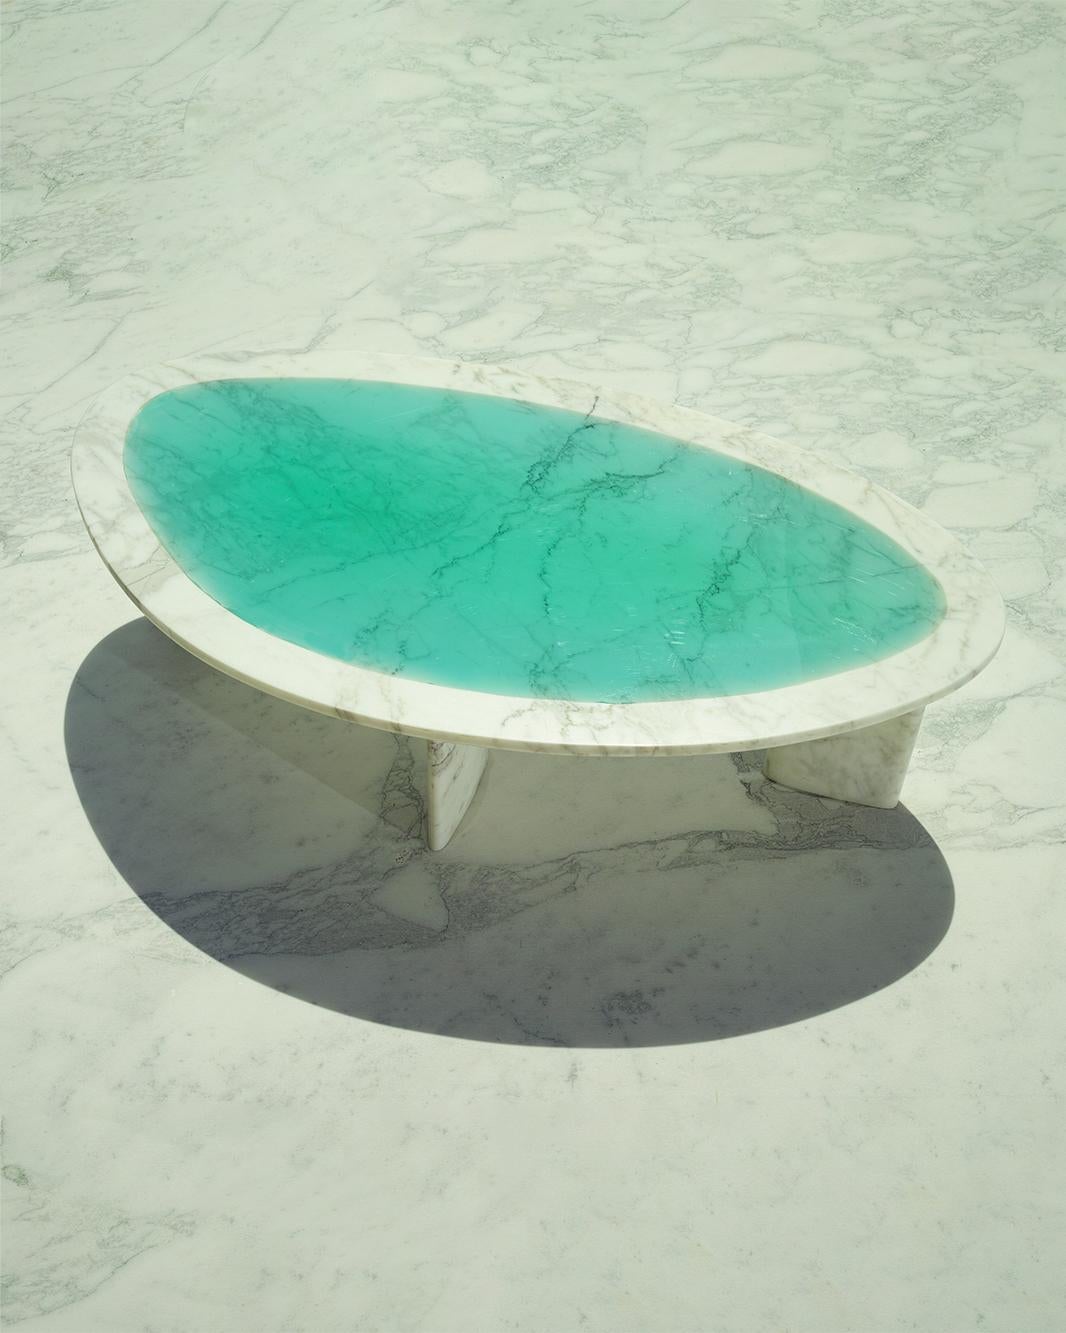 Minerals Turquoise Low Table by Carla Baz
Entirely handcrafted in solid marble with resin inlay.
Dimensions: L 136 x W 75 x H 35/45 CM
Weight: 65 kg
Material: Brescia Viola Marble, resin.
Also available in other shapes: round, rounded square.

The